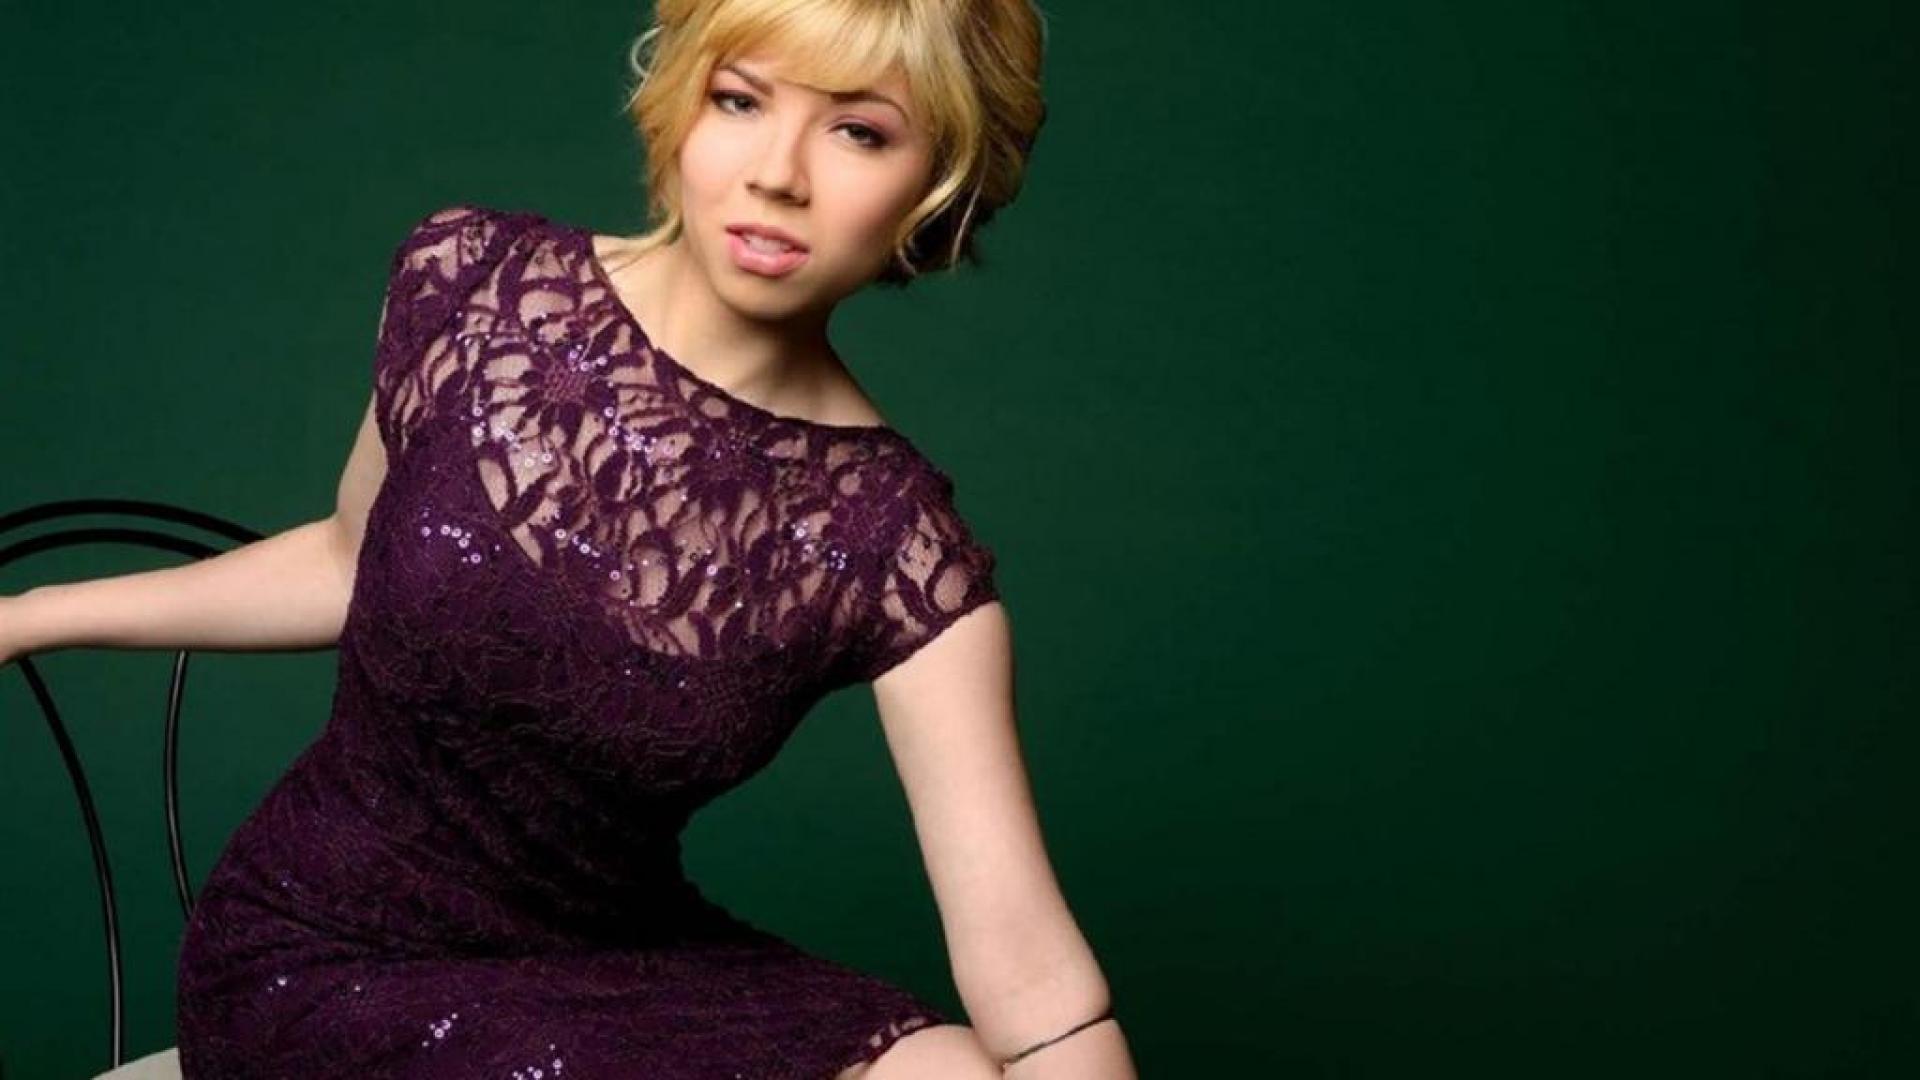 Jennette McCurdy wallpaper in high resolution